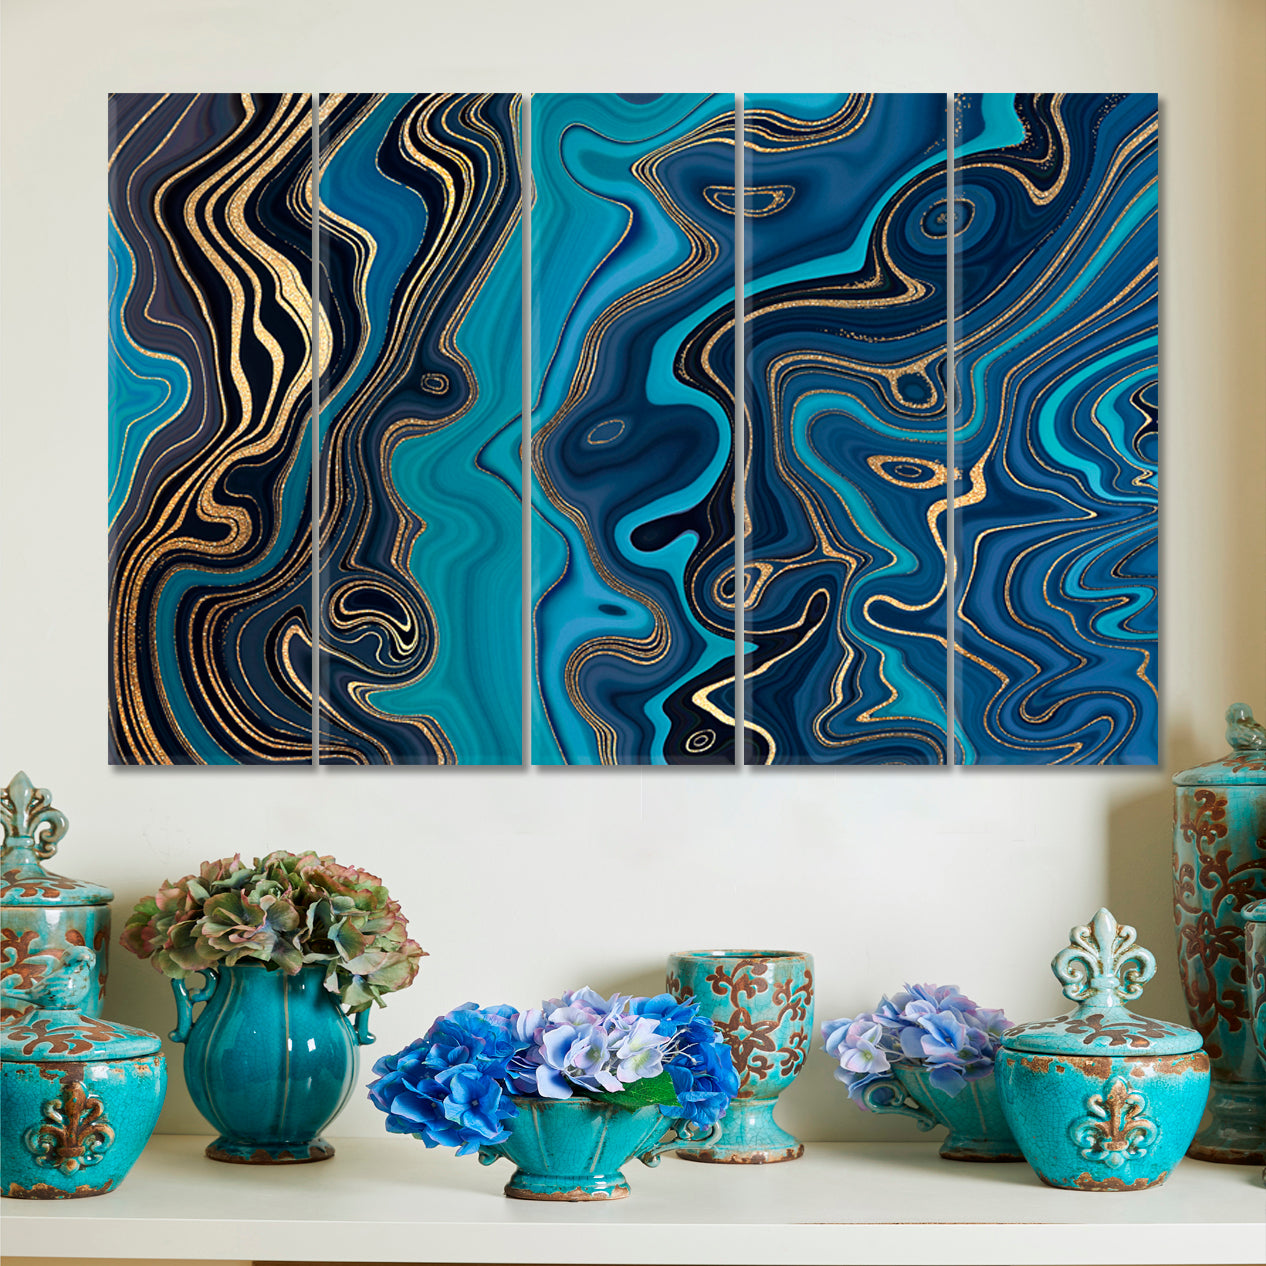 MARBLE EFFECT series Turquoise Navy Blue & Gold Abstract Swirl Artistic Design Giclée Print Fluid Art, Oriental Marbling Canvas Print Artesty 5 panels 36" x 24" 